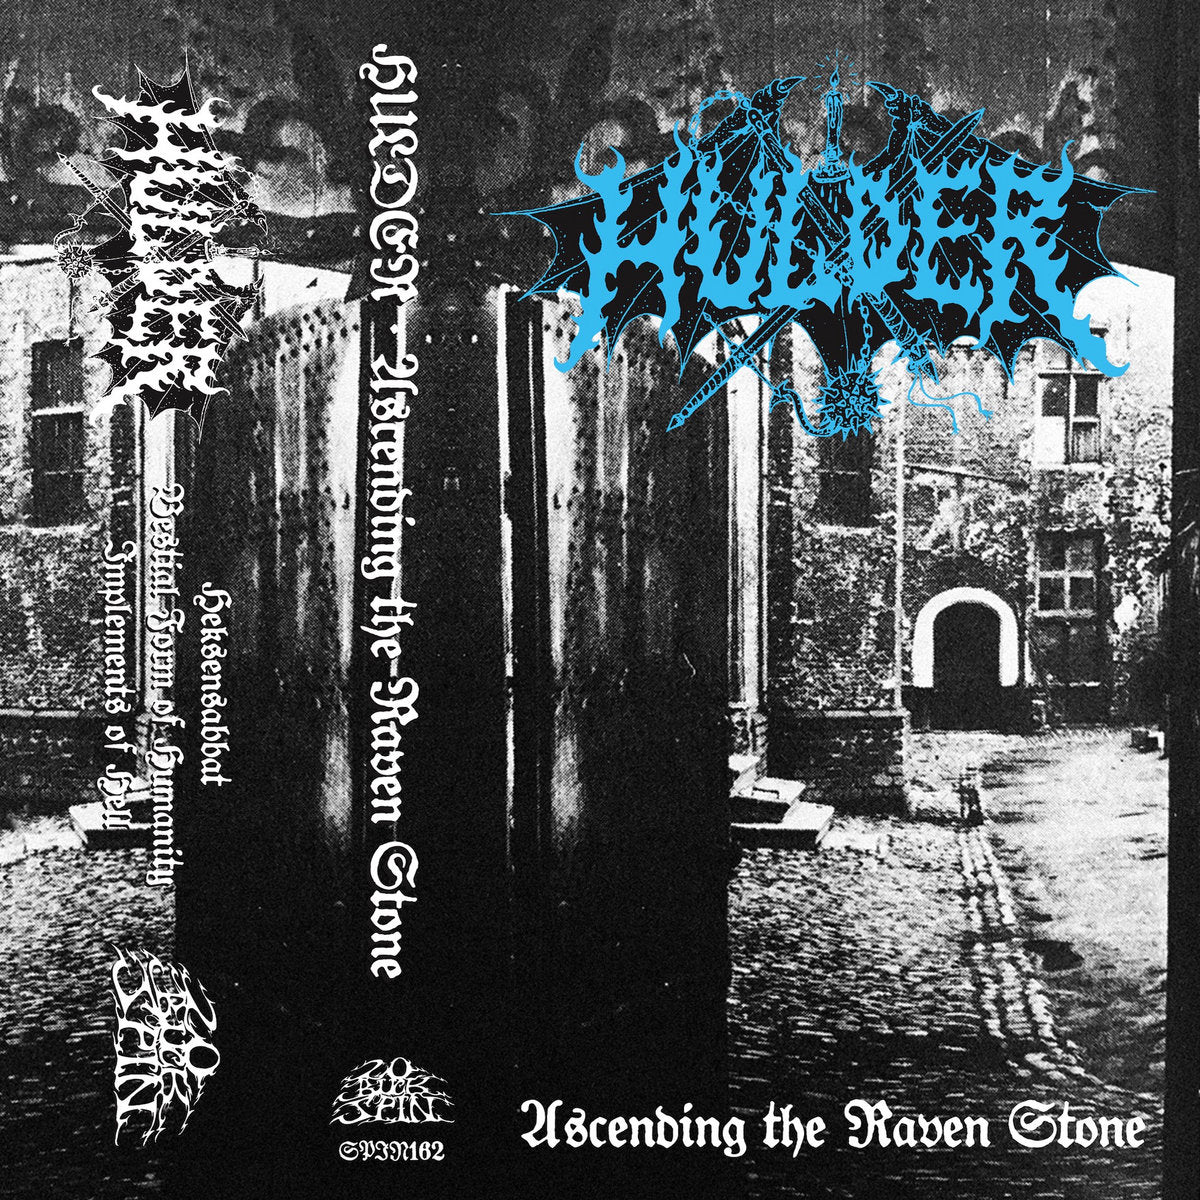 [SOLD OUT] HULDER "Ascending the Raven Stone" cassette tape